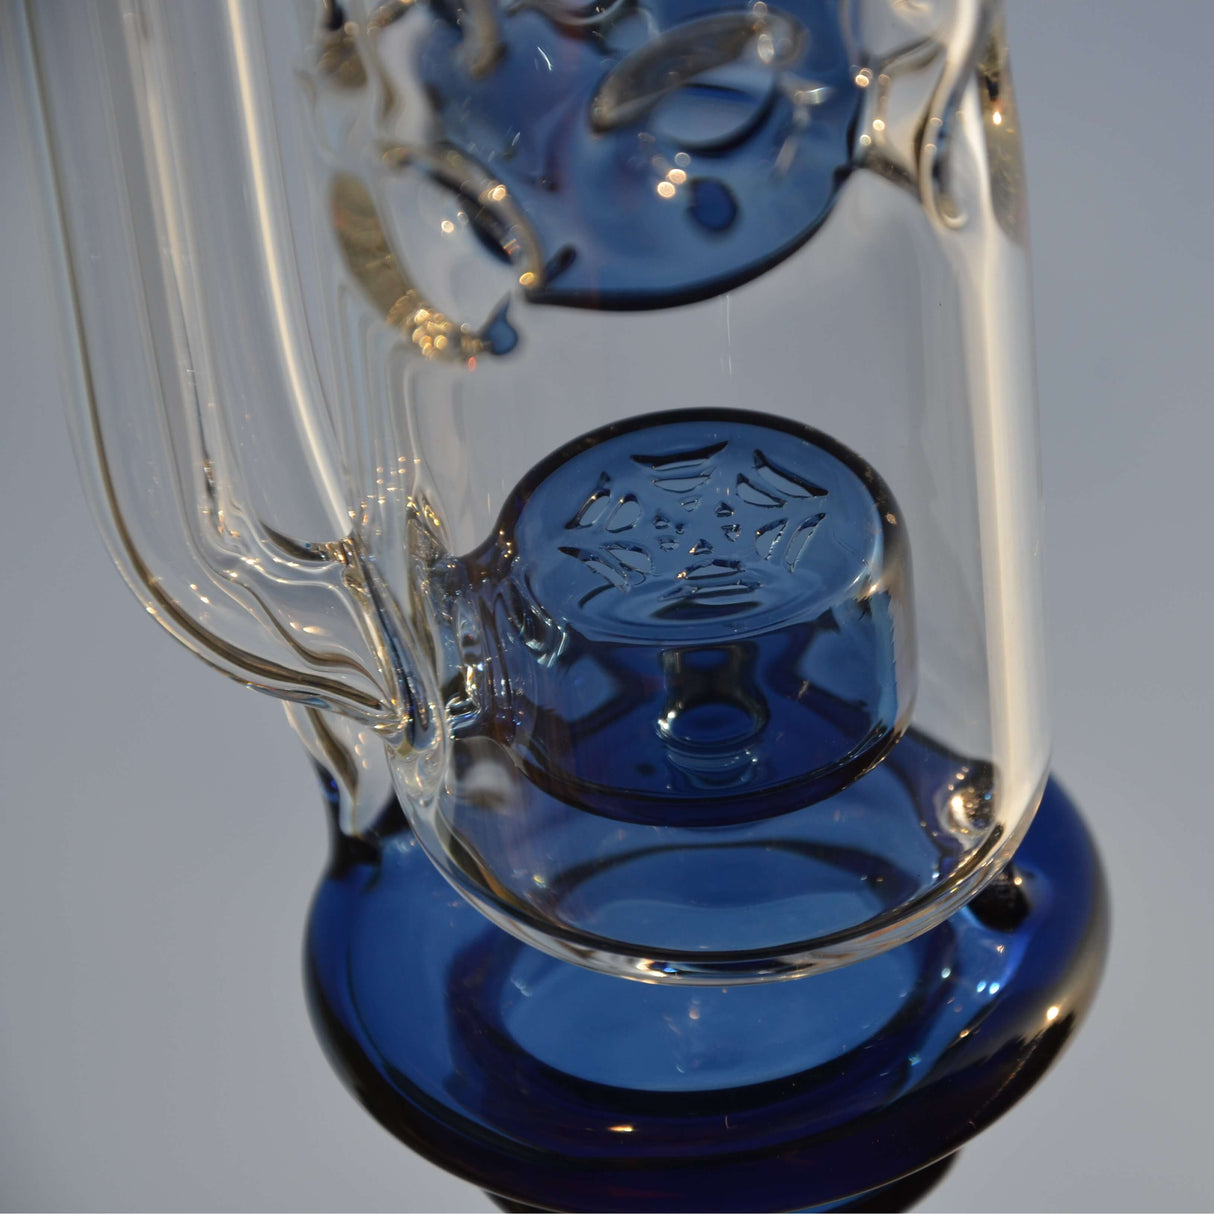 Calibear Straight Fab Carta Attachment in blue, close-up side view showing intricate percolator design